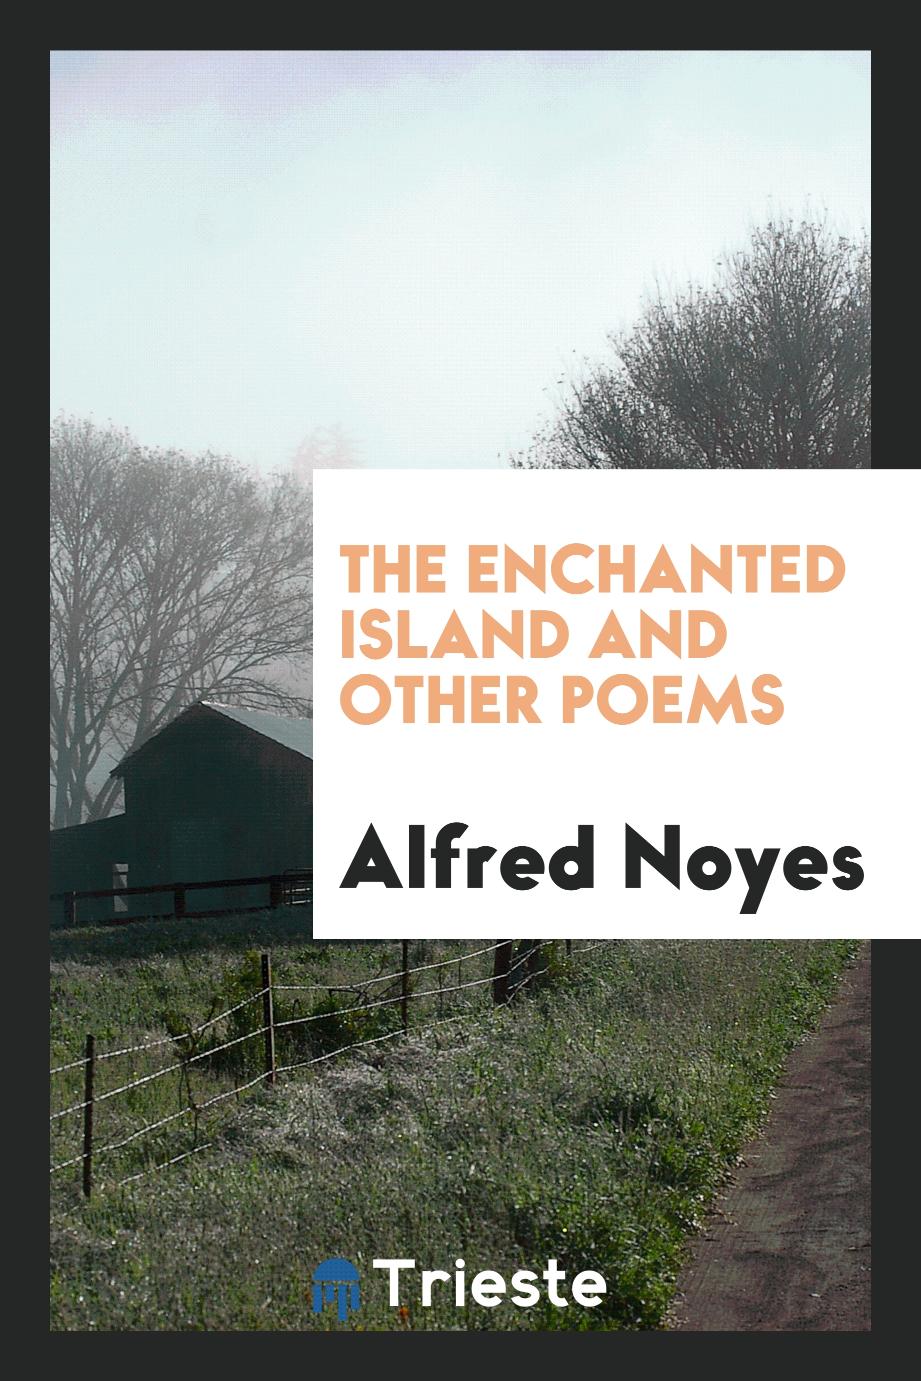 The enchanted island and other poems